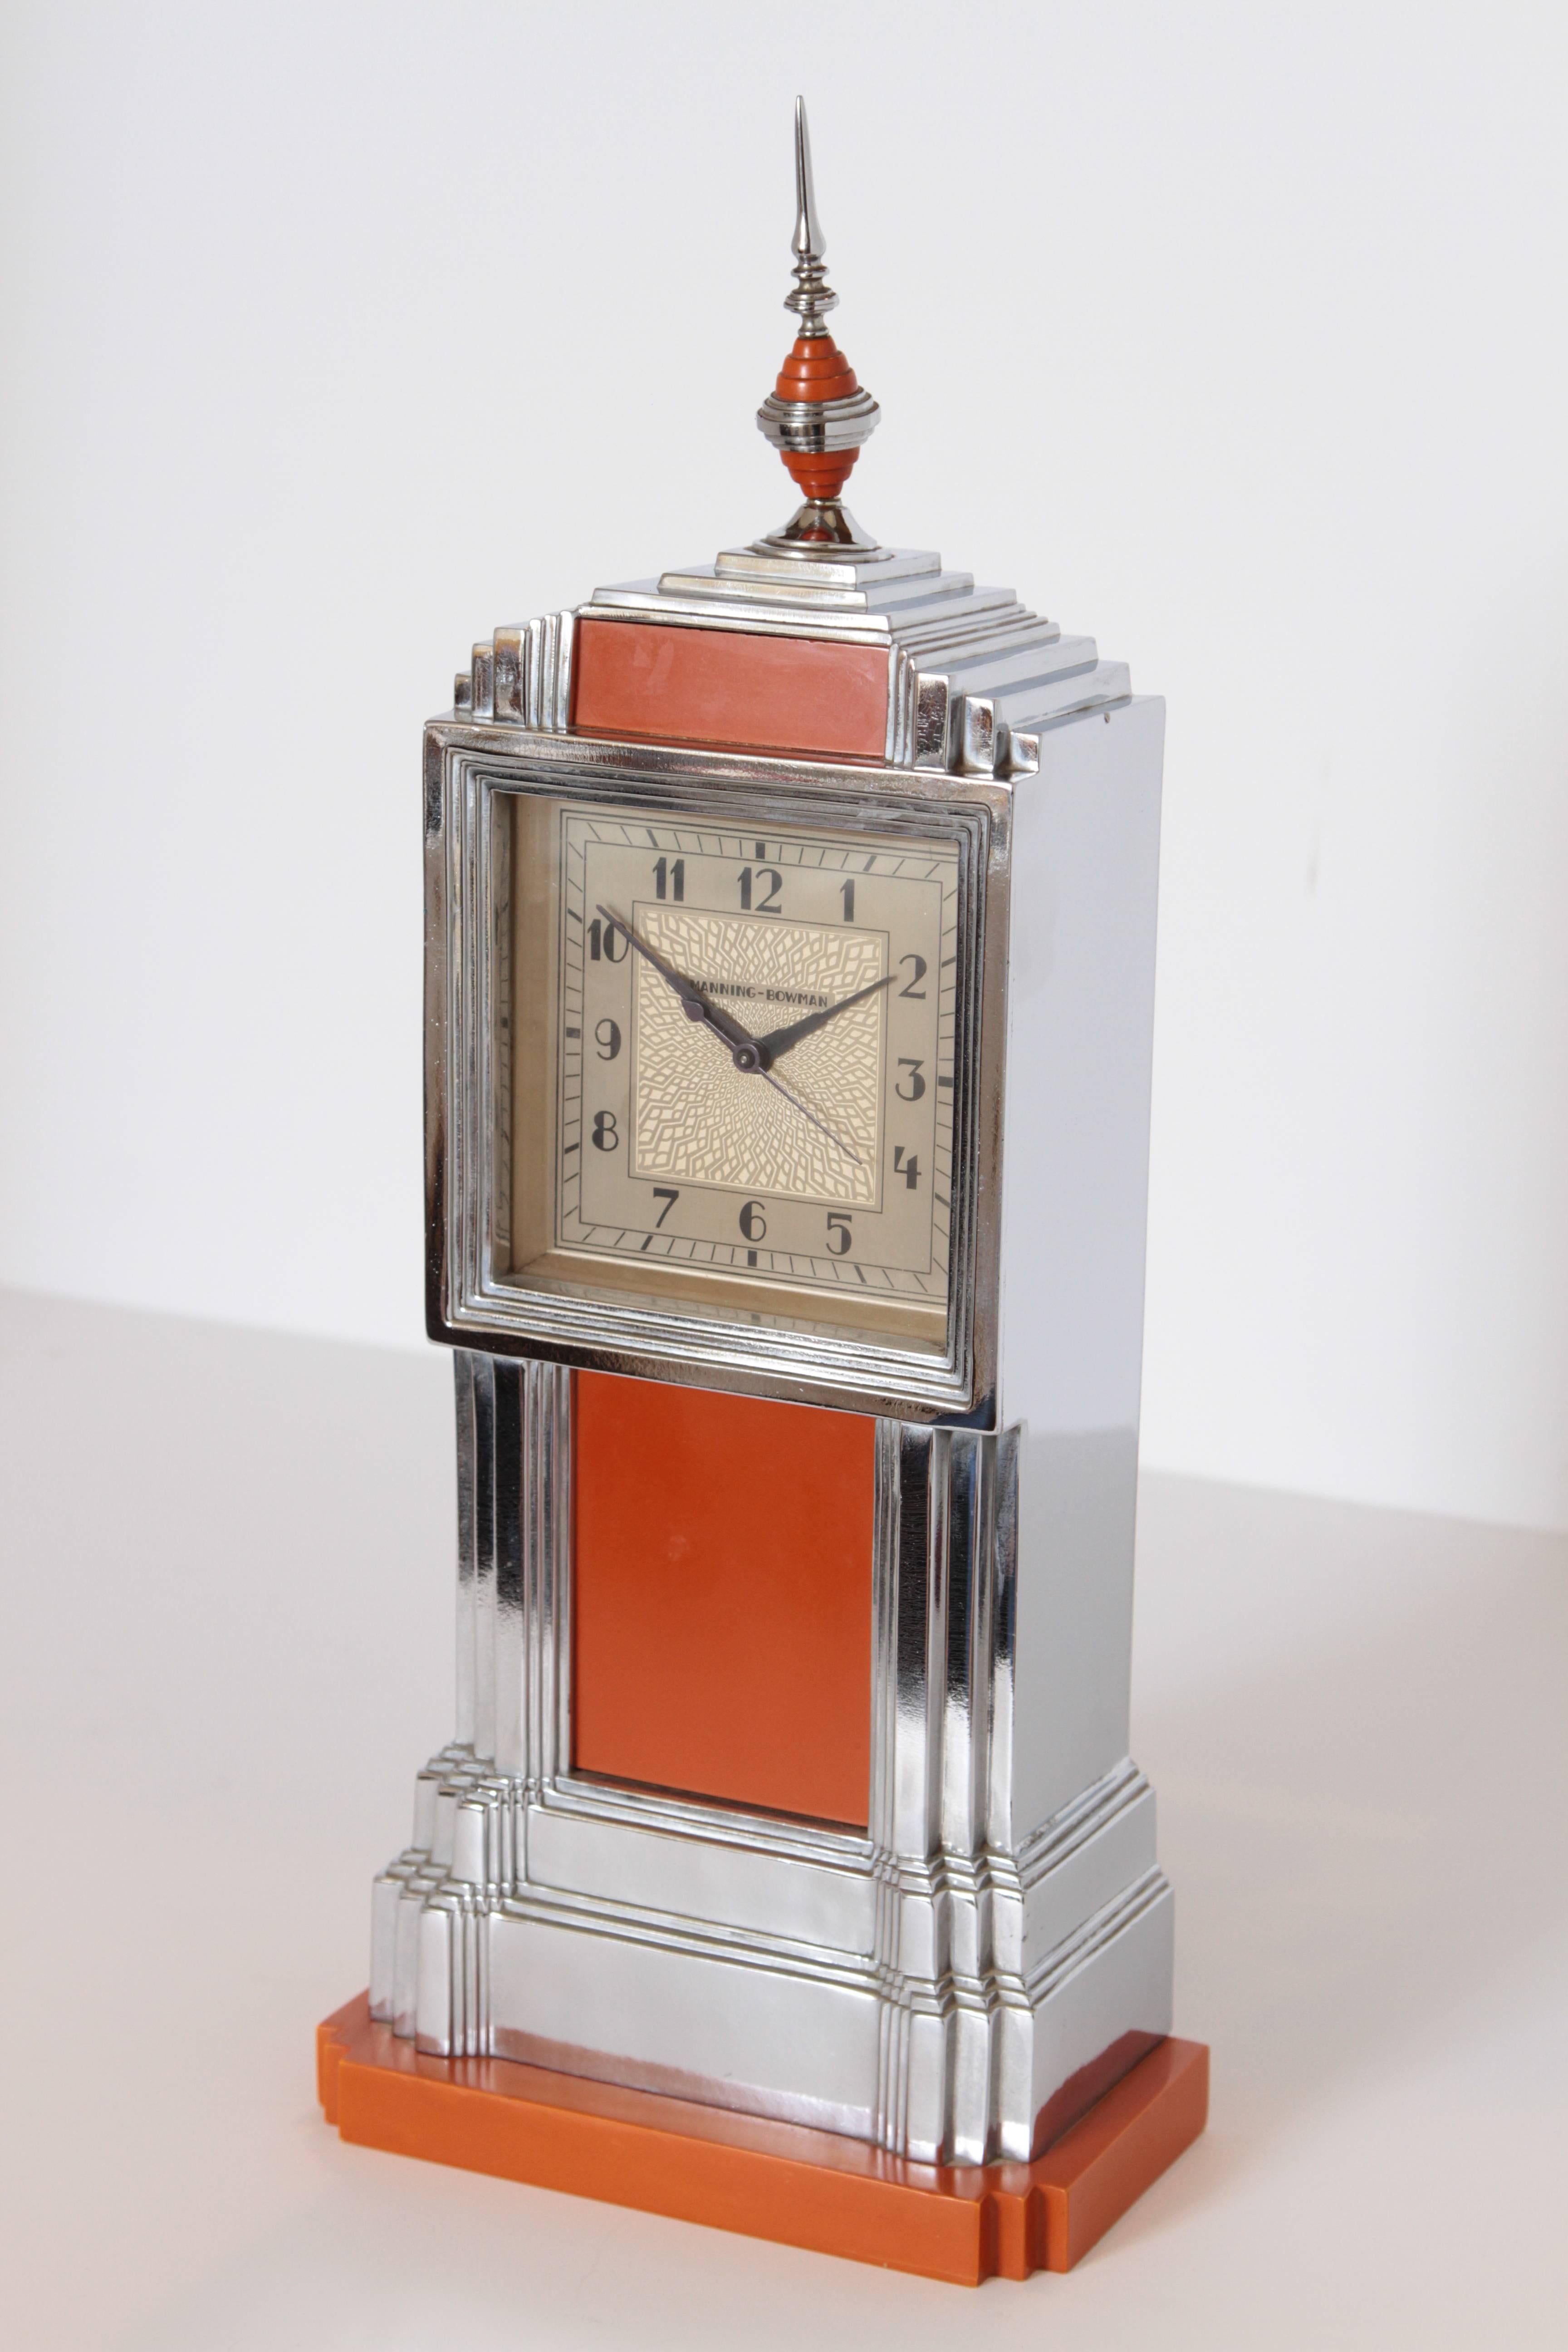 Machine age art deco manning bowman skyscraper clock, complete

Iconic machine age design.
Clock is complete with elusive original finial and appears to have it's original silk-wrapped cord.
Chrome is very good, catalin is very good and evenly